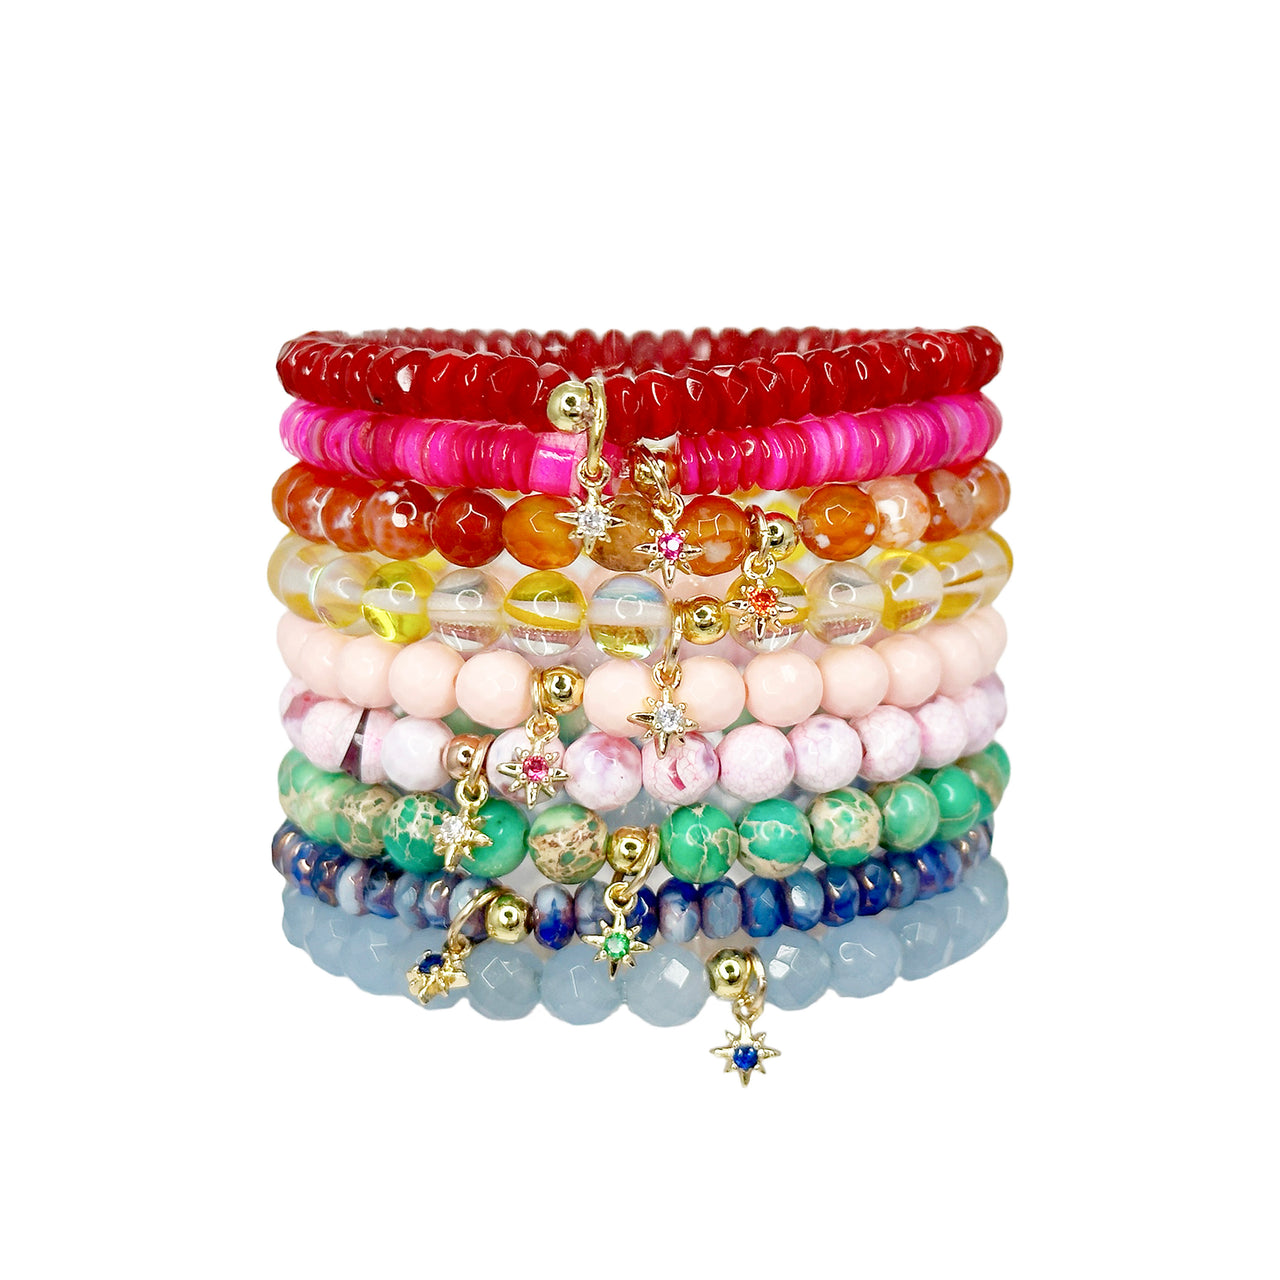 Lisa's North Star Collection of Colorful Bracelets